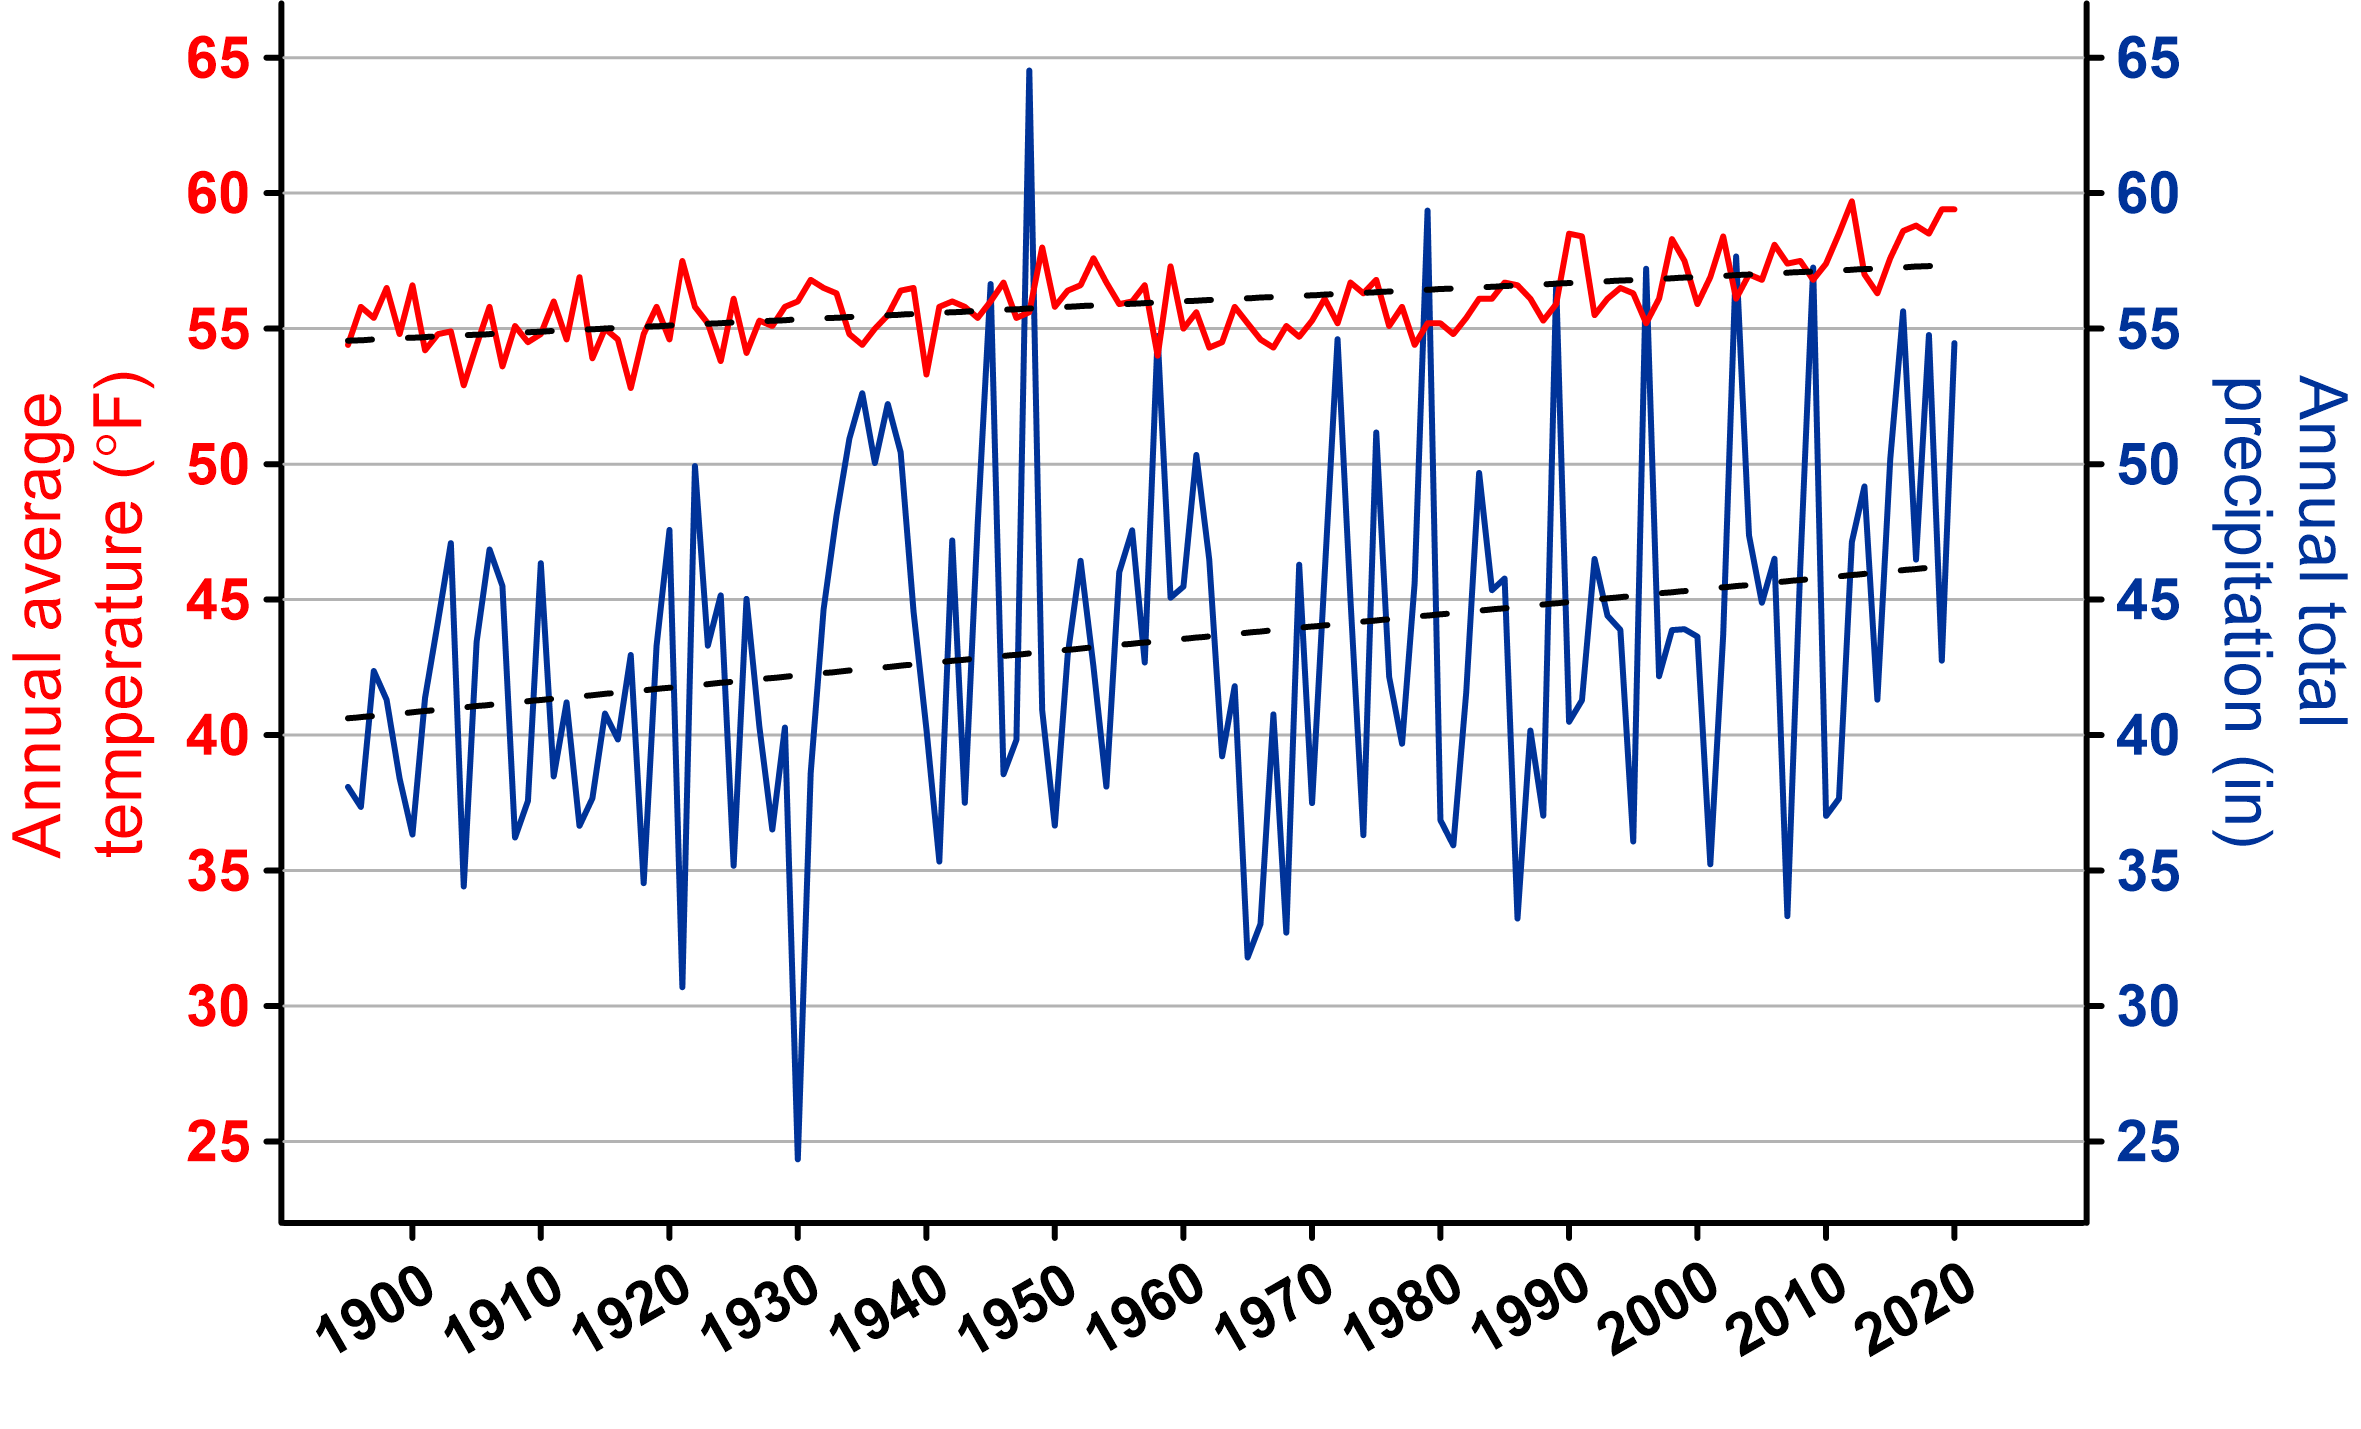 line graph on precipitation and temperature trends for ASIS in 2020